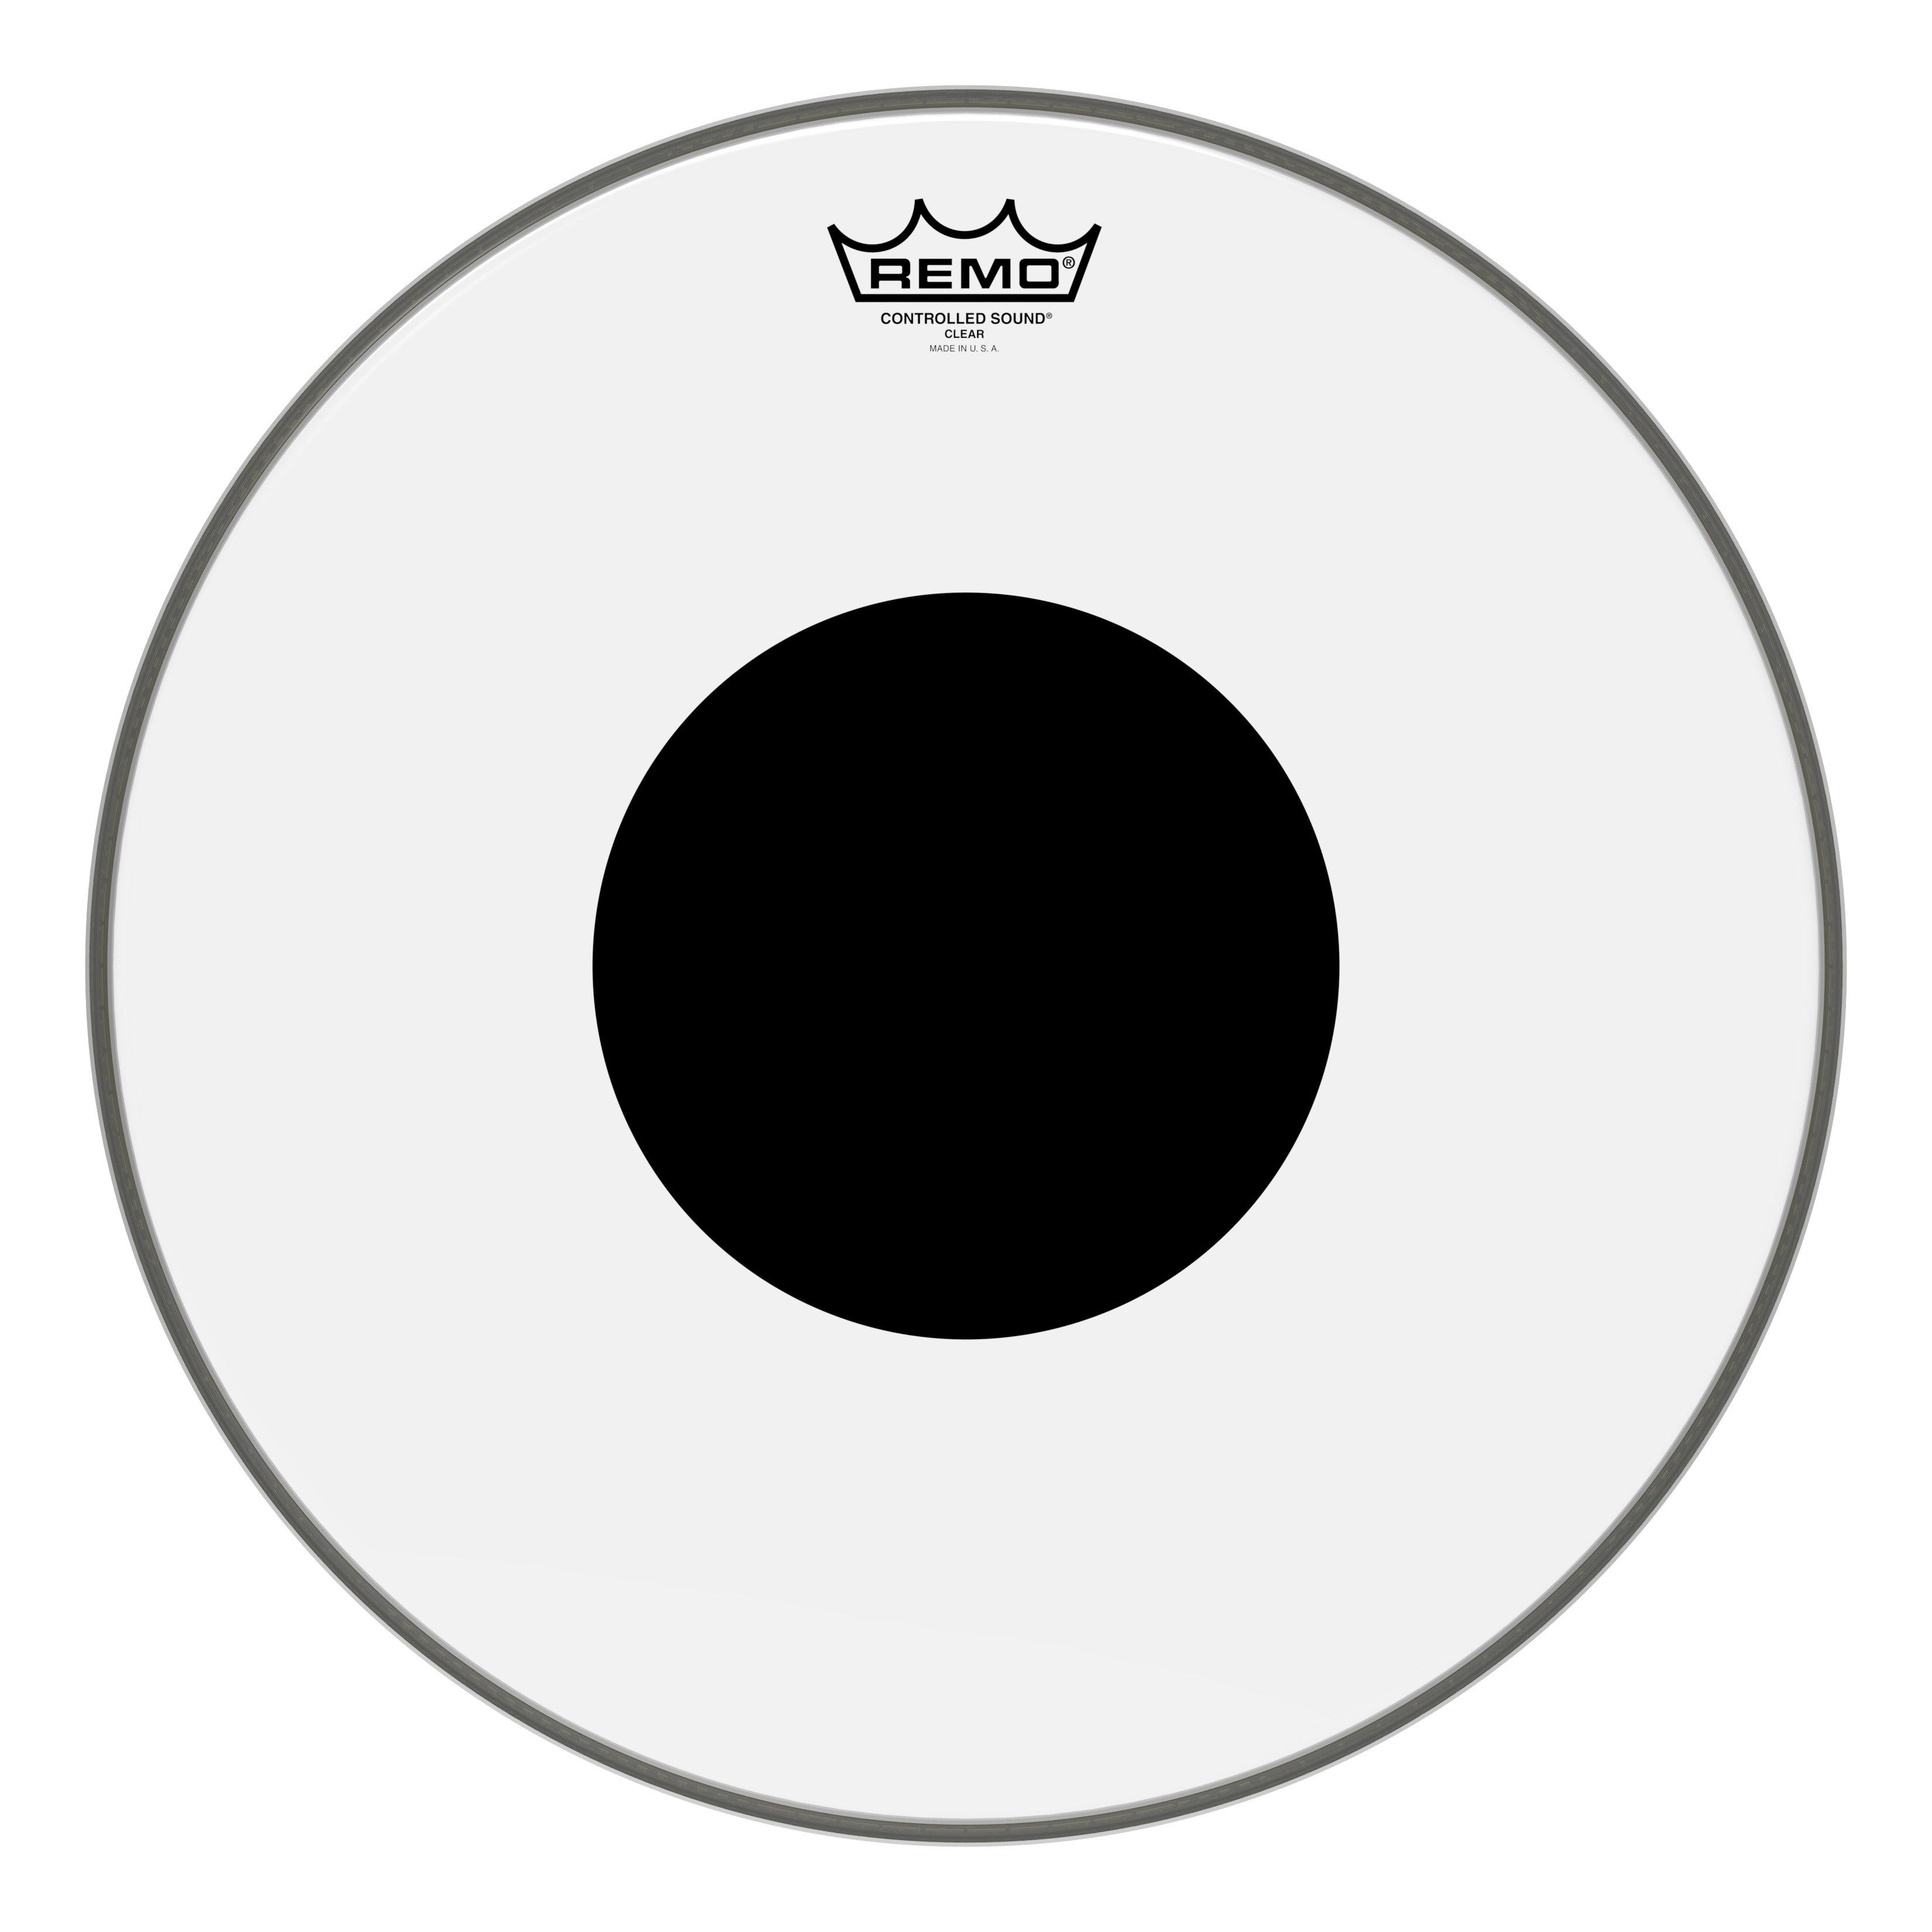 REMO 16" Controlled Sound Clear Batter Drum Head, Black Dot (CS-0316-10) Drum Heads Remo 